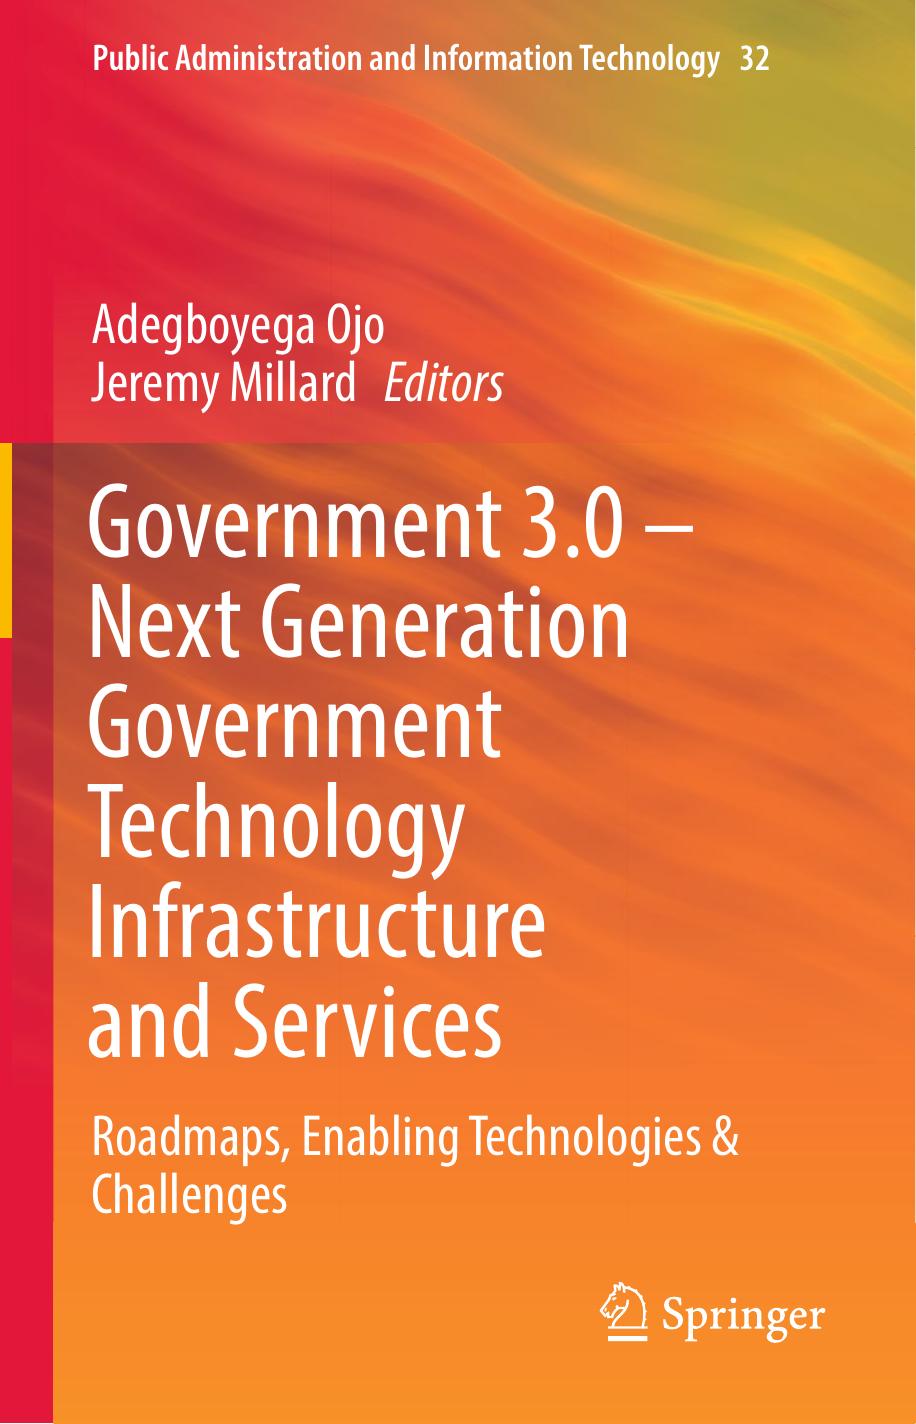 Government 3.0 – Next Generation Government Technology Infrastructure and Services, 2017